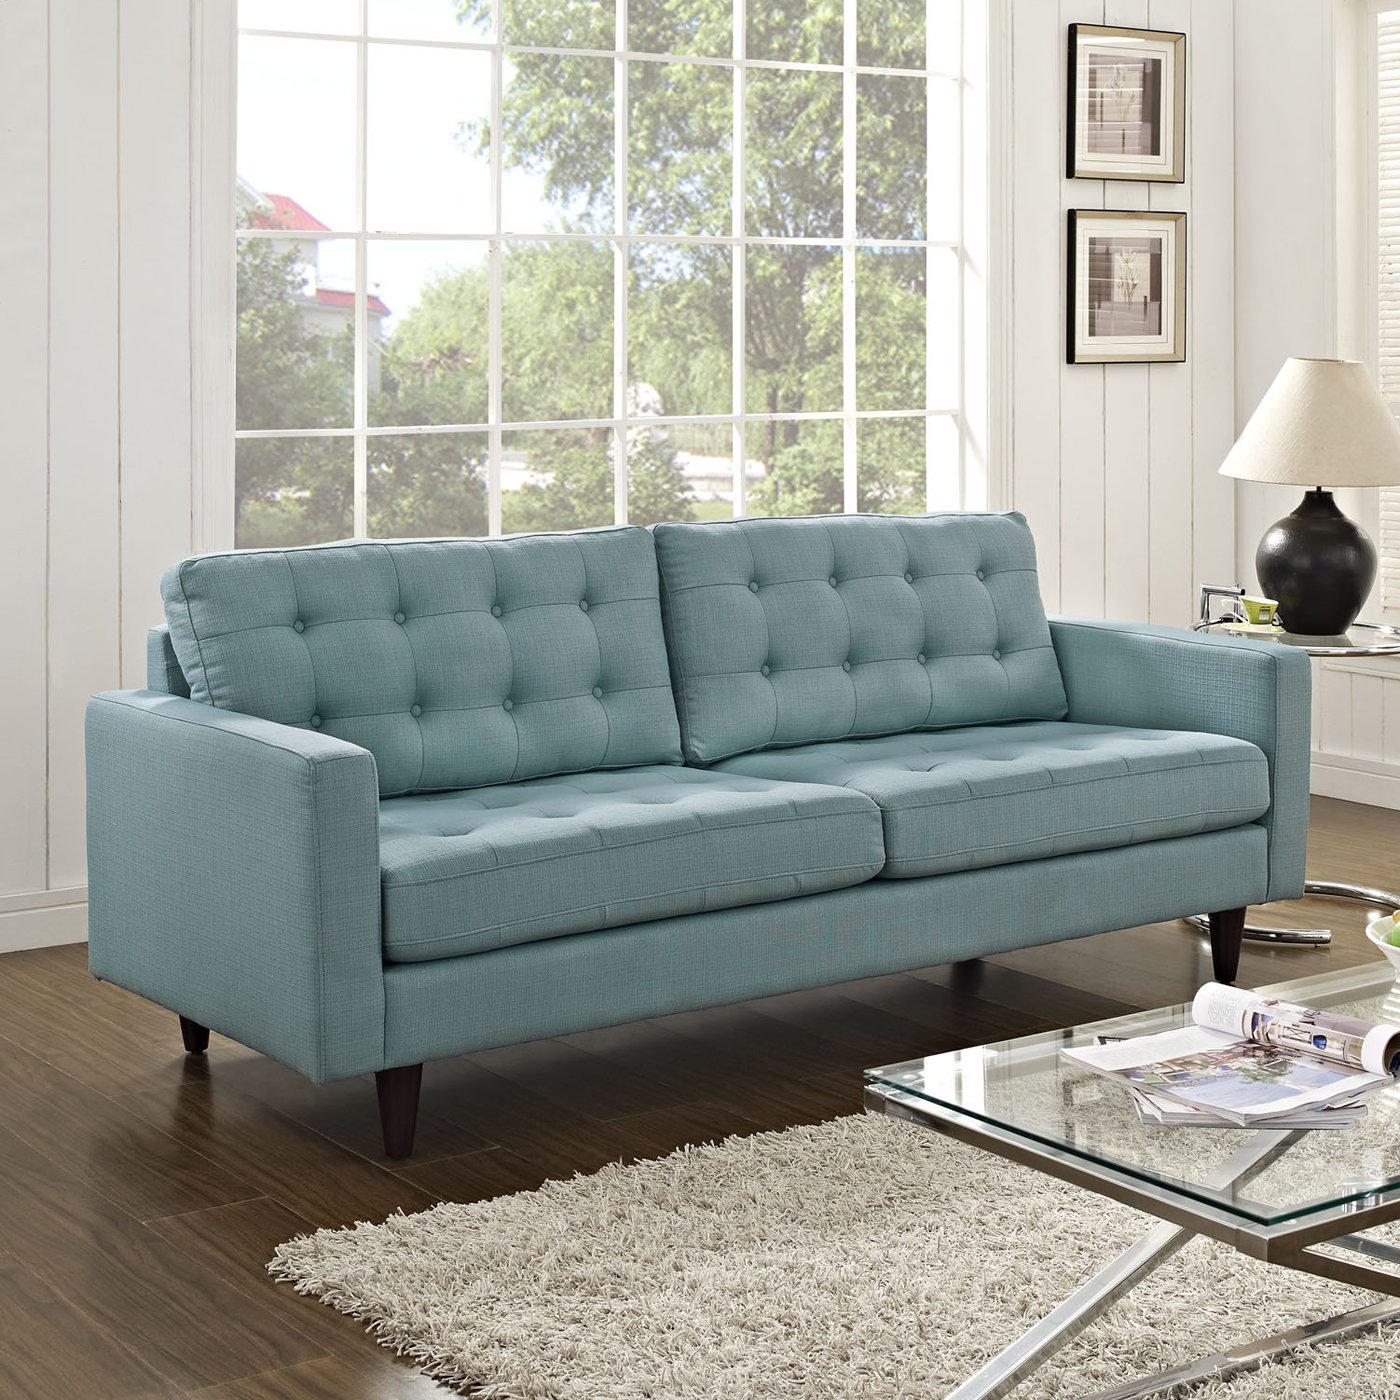 SOS ATG - MODWAY in the Couches, Sofas & Loveseats department at Lowes.com